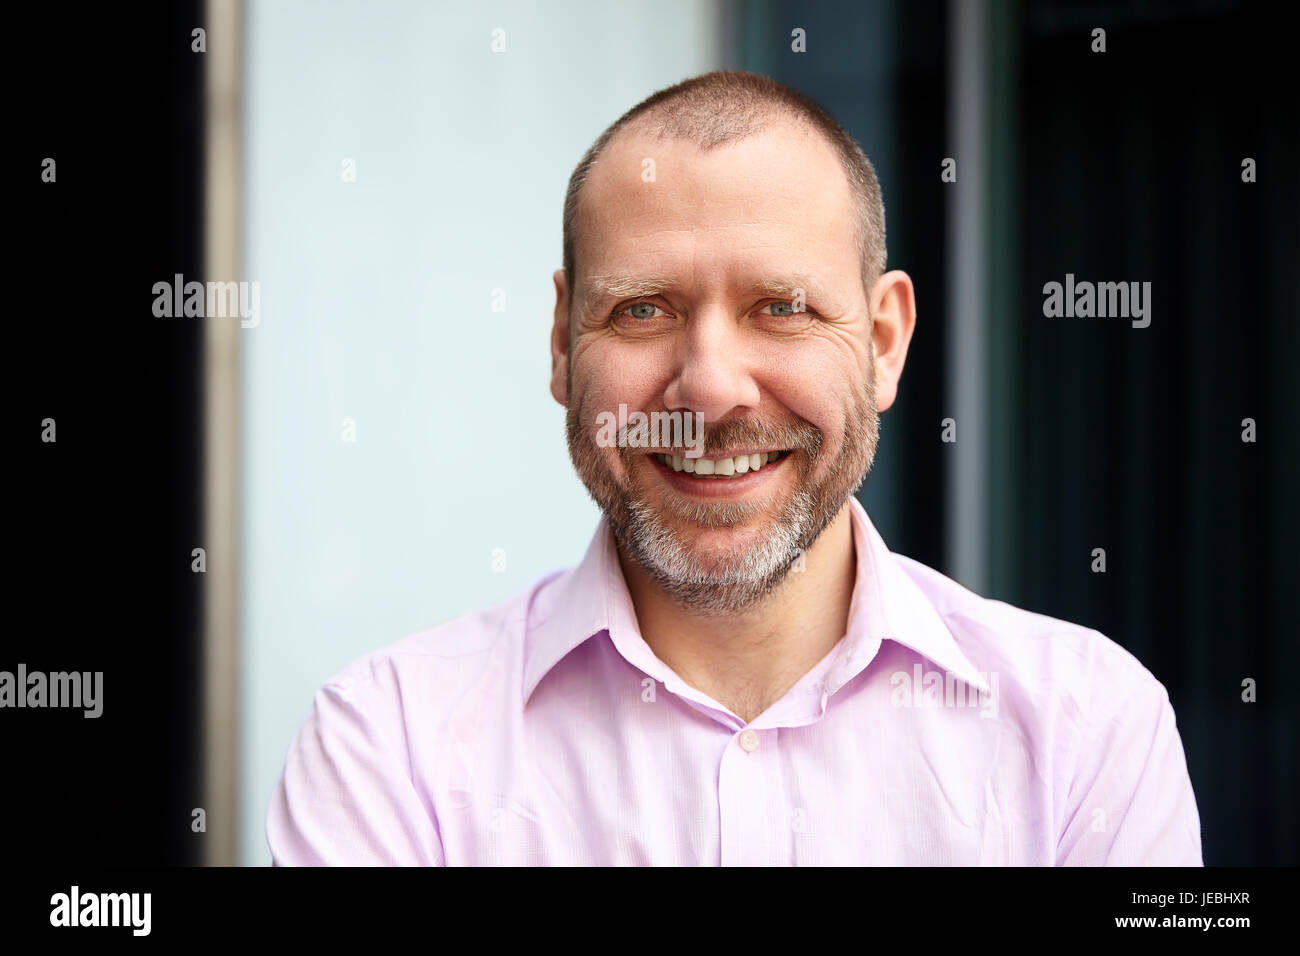 Portrait of middle-aged man looking at camera. Banque D'Images